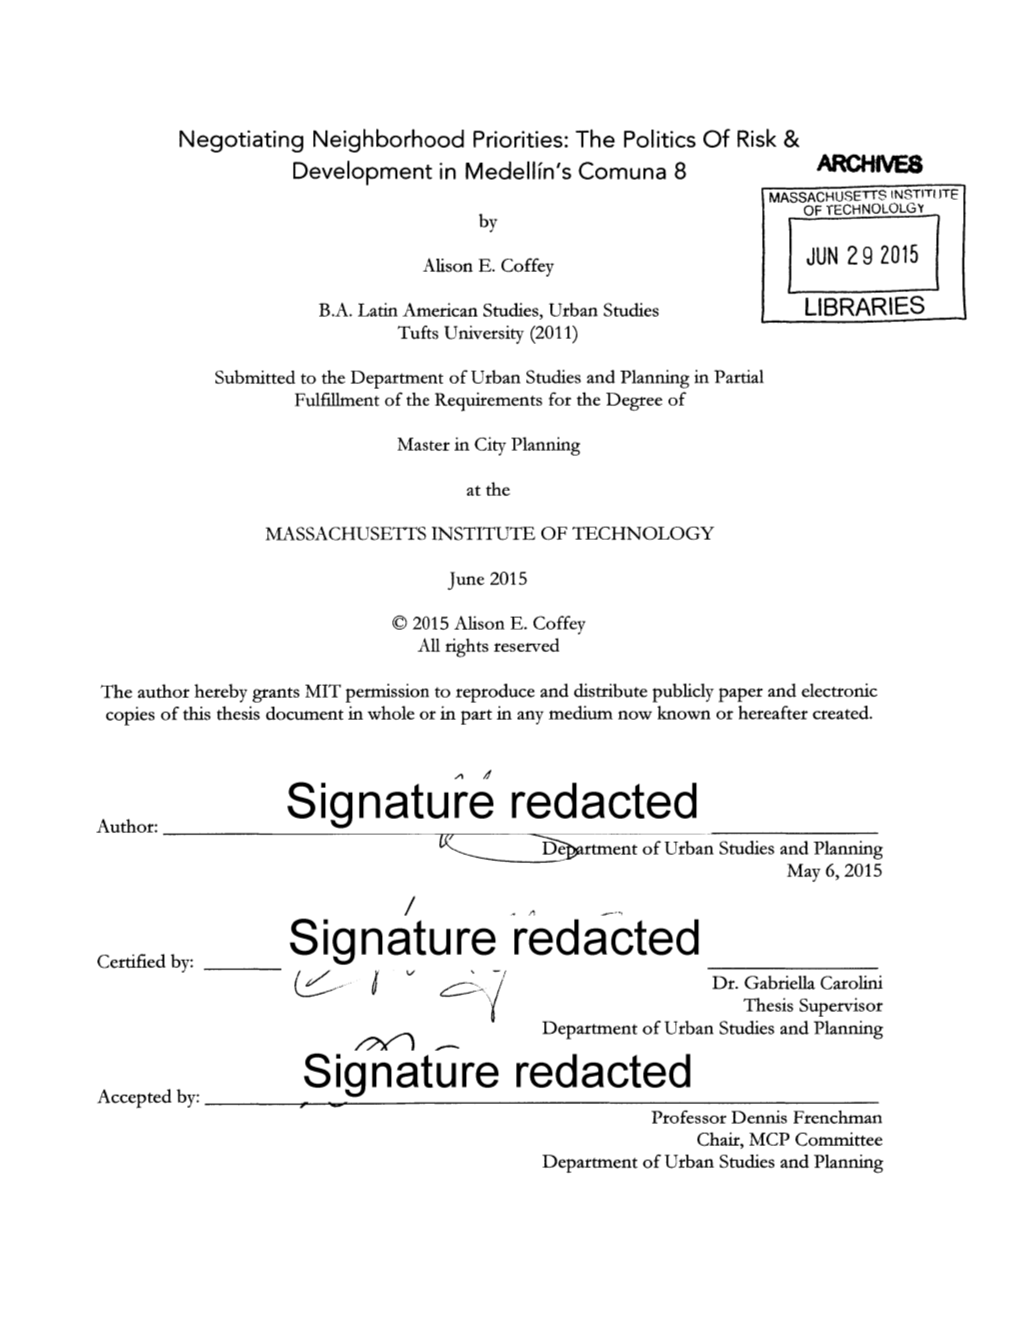 Signature Redacted-- Dertment of Urban Studies and Planning May 6, 2015